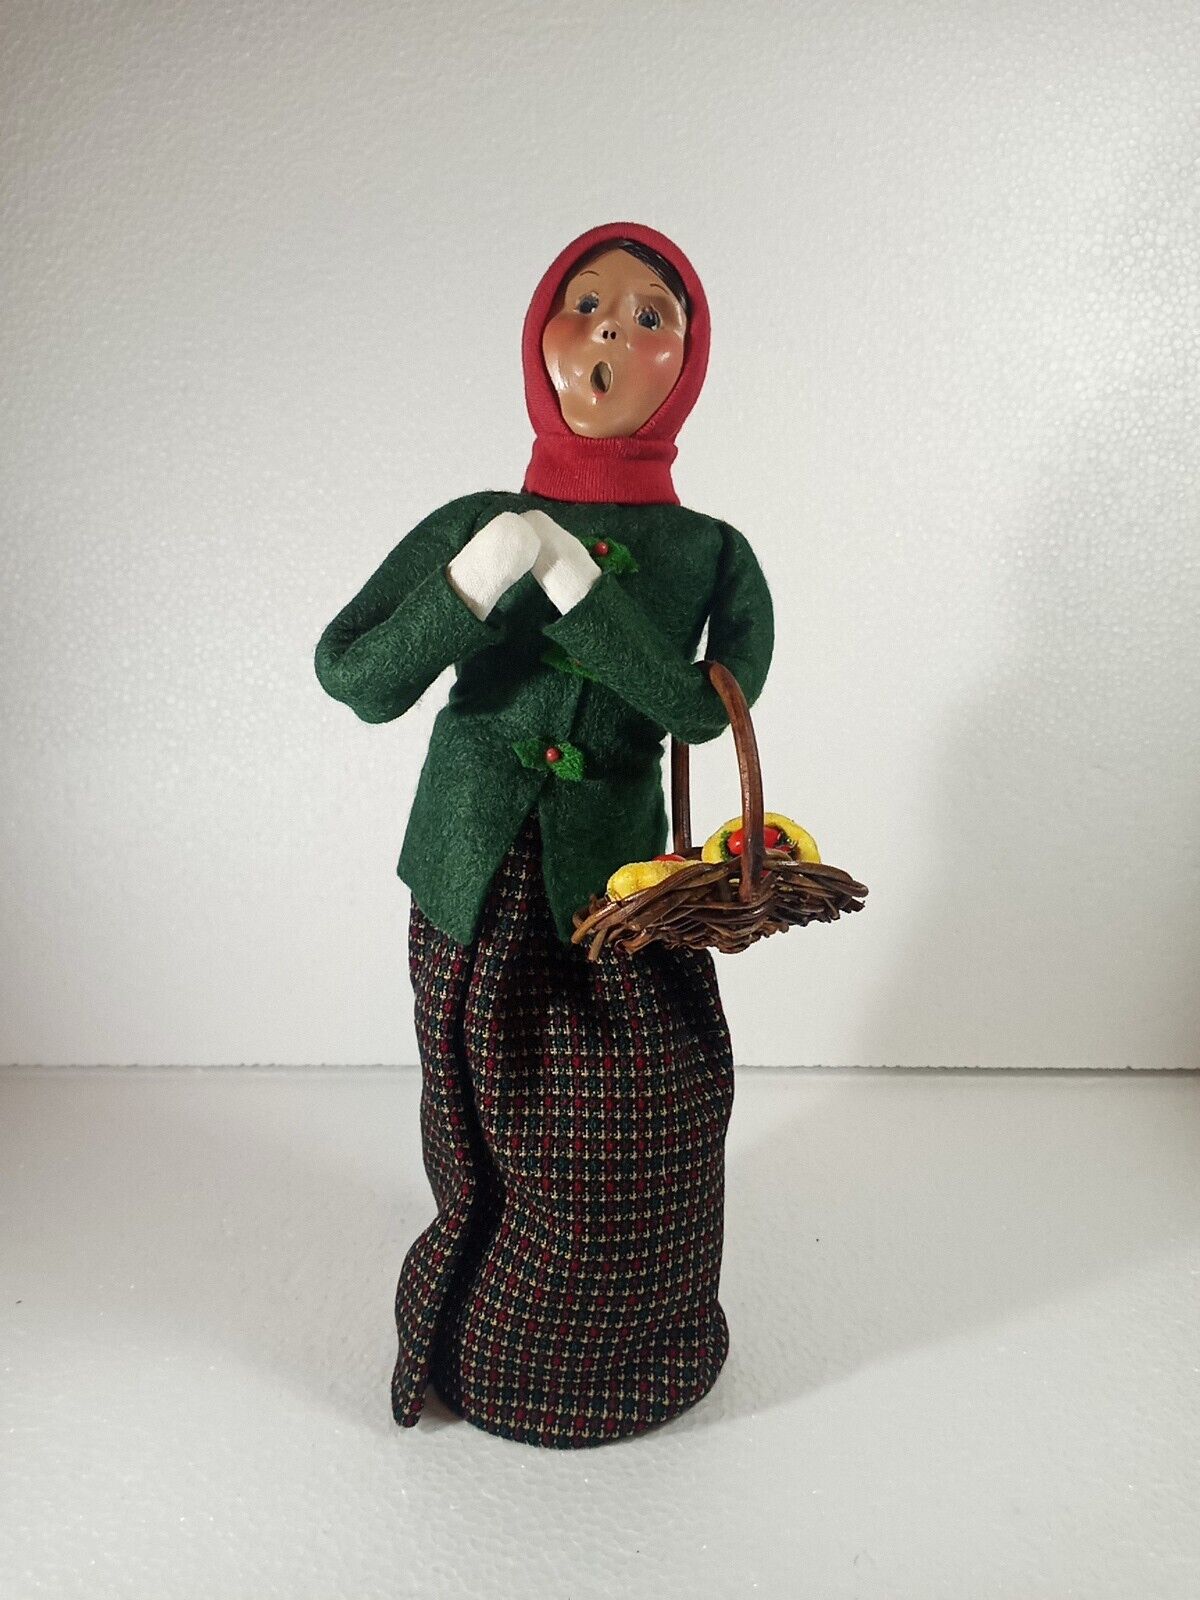 Byers Choice Carolers Woman With Pie Basket 2001 # 13/100 Rare Limited Edition 